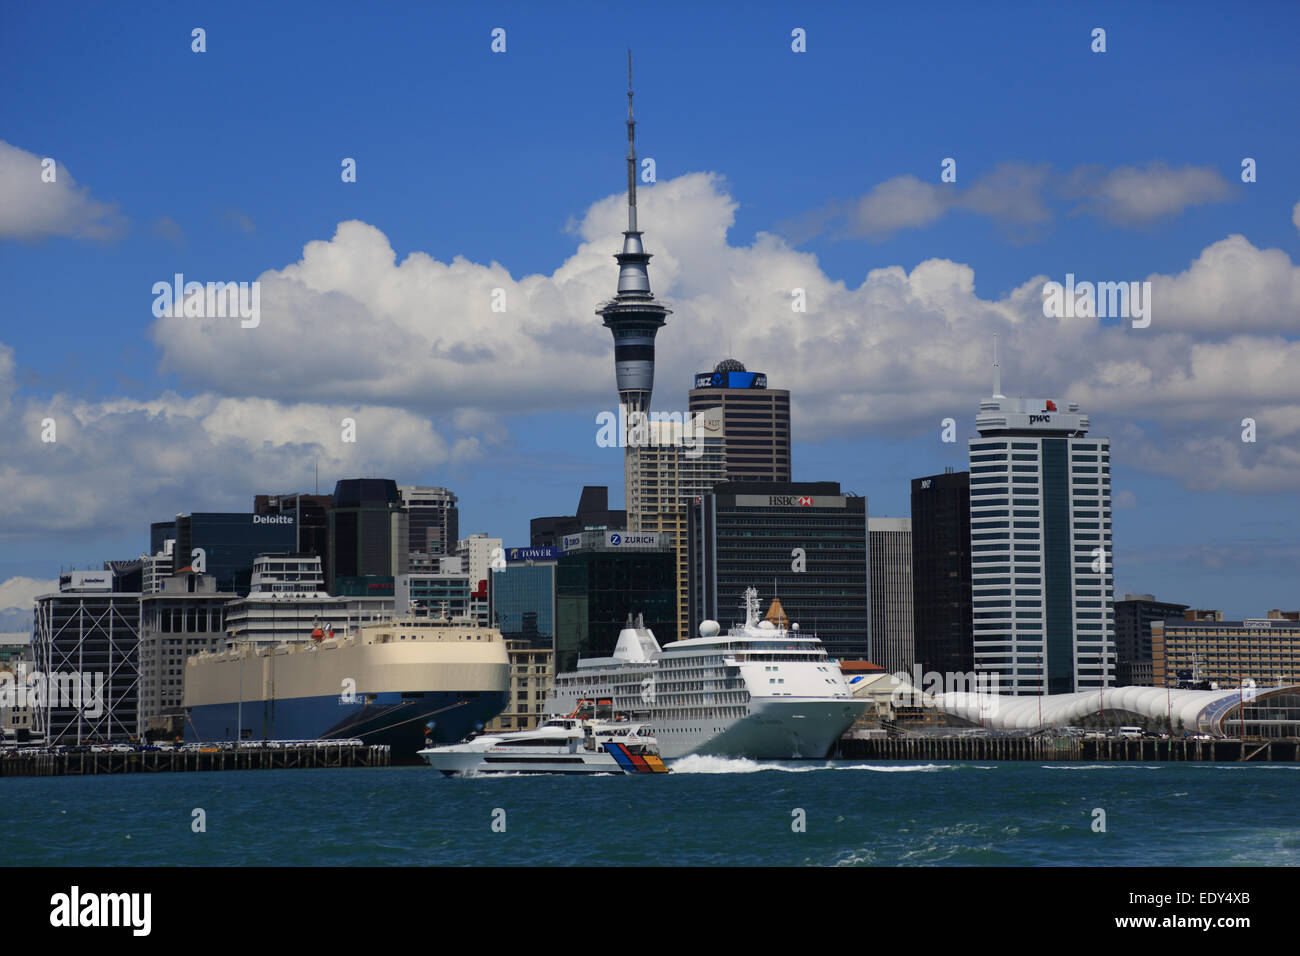 Auckland Port and skyline with fast boat, Diamond Princess cruise ship and other shipping from Devenport Ferry, New Zealand Stock Photo